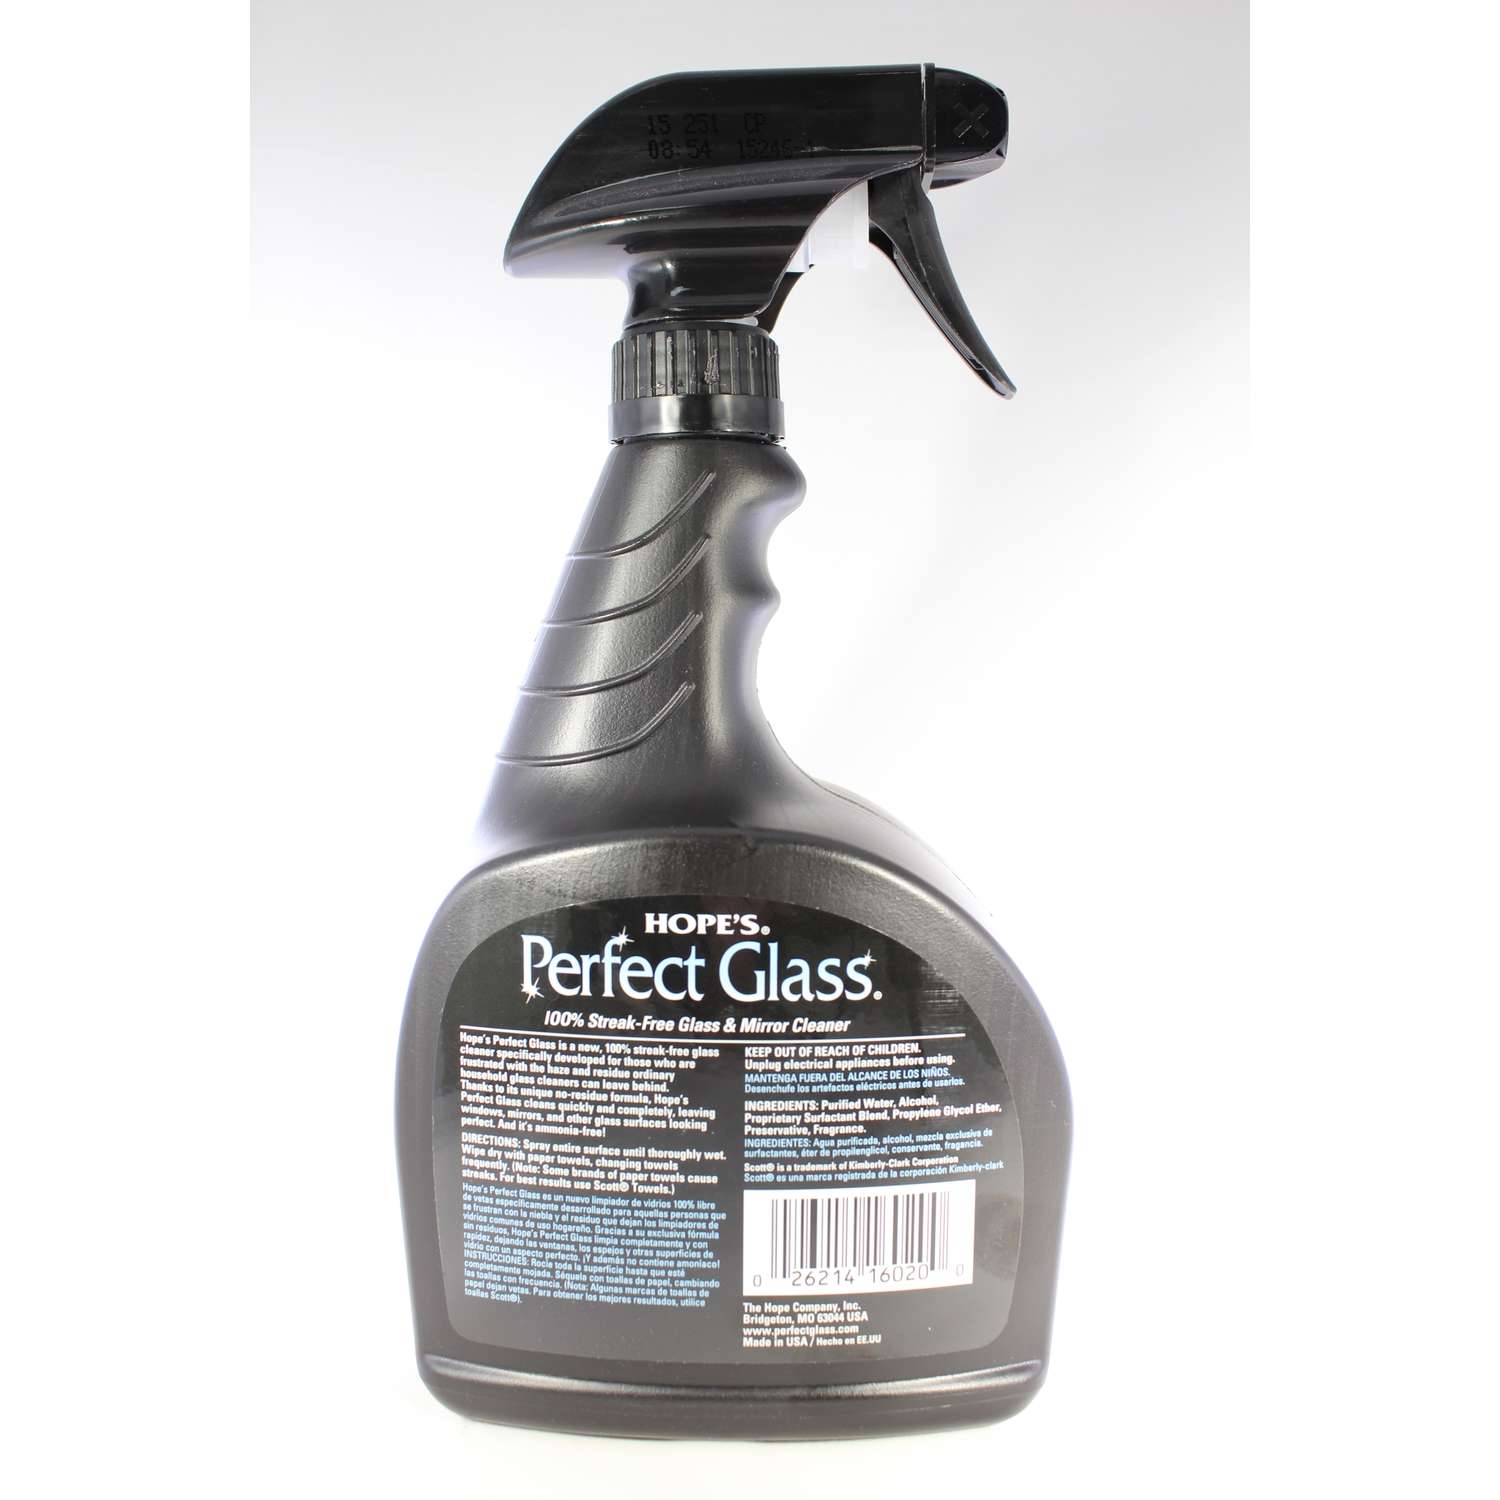 Hope's Perfect Glass Automotive Glass Cleaner, 32 Ounce